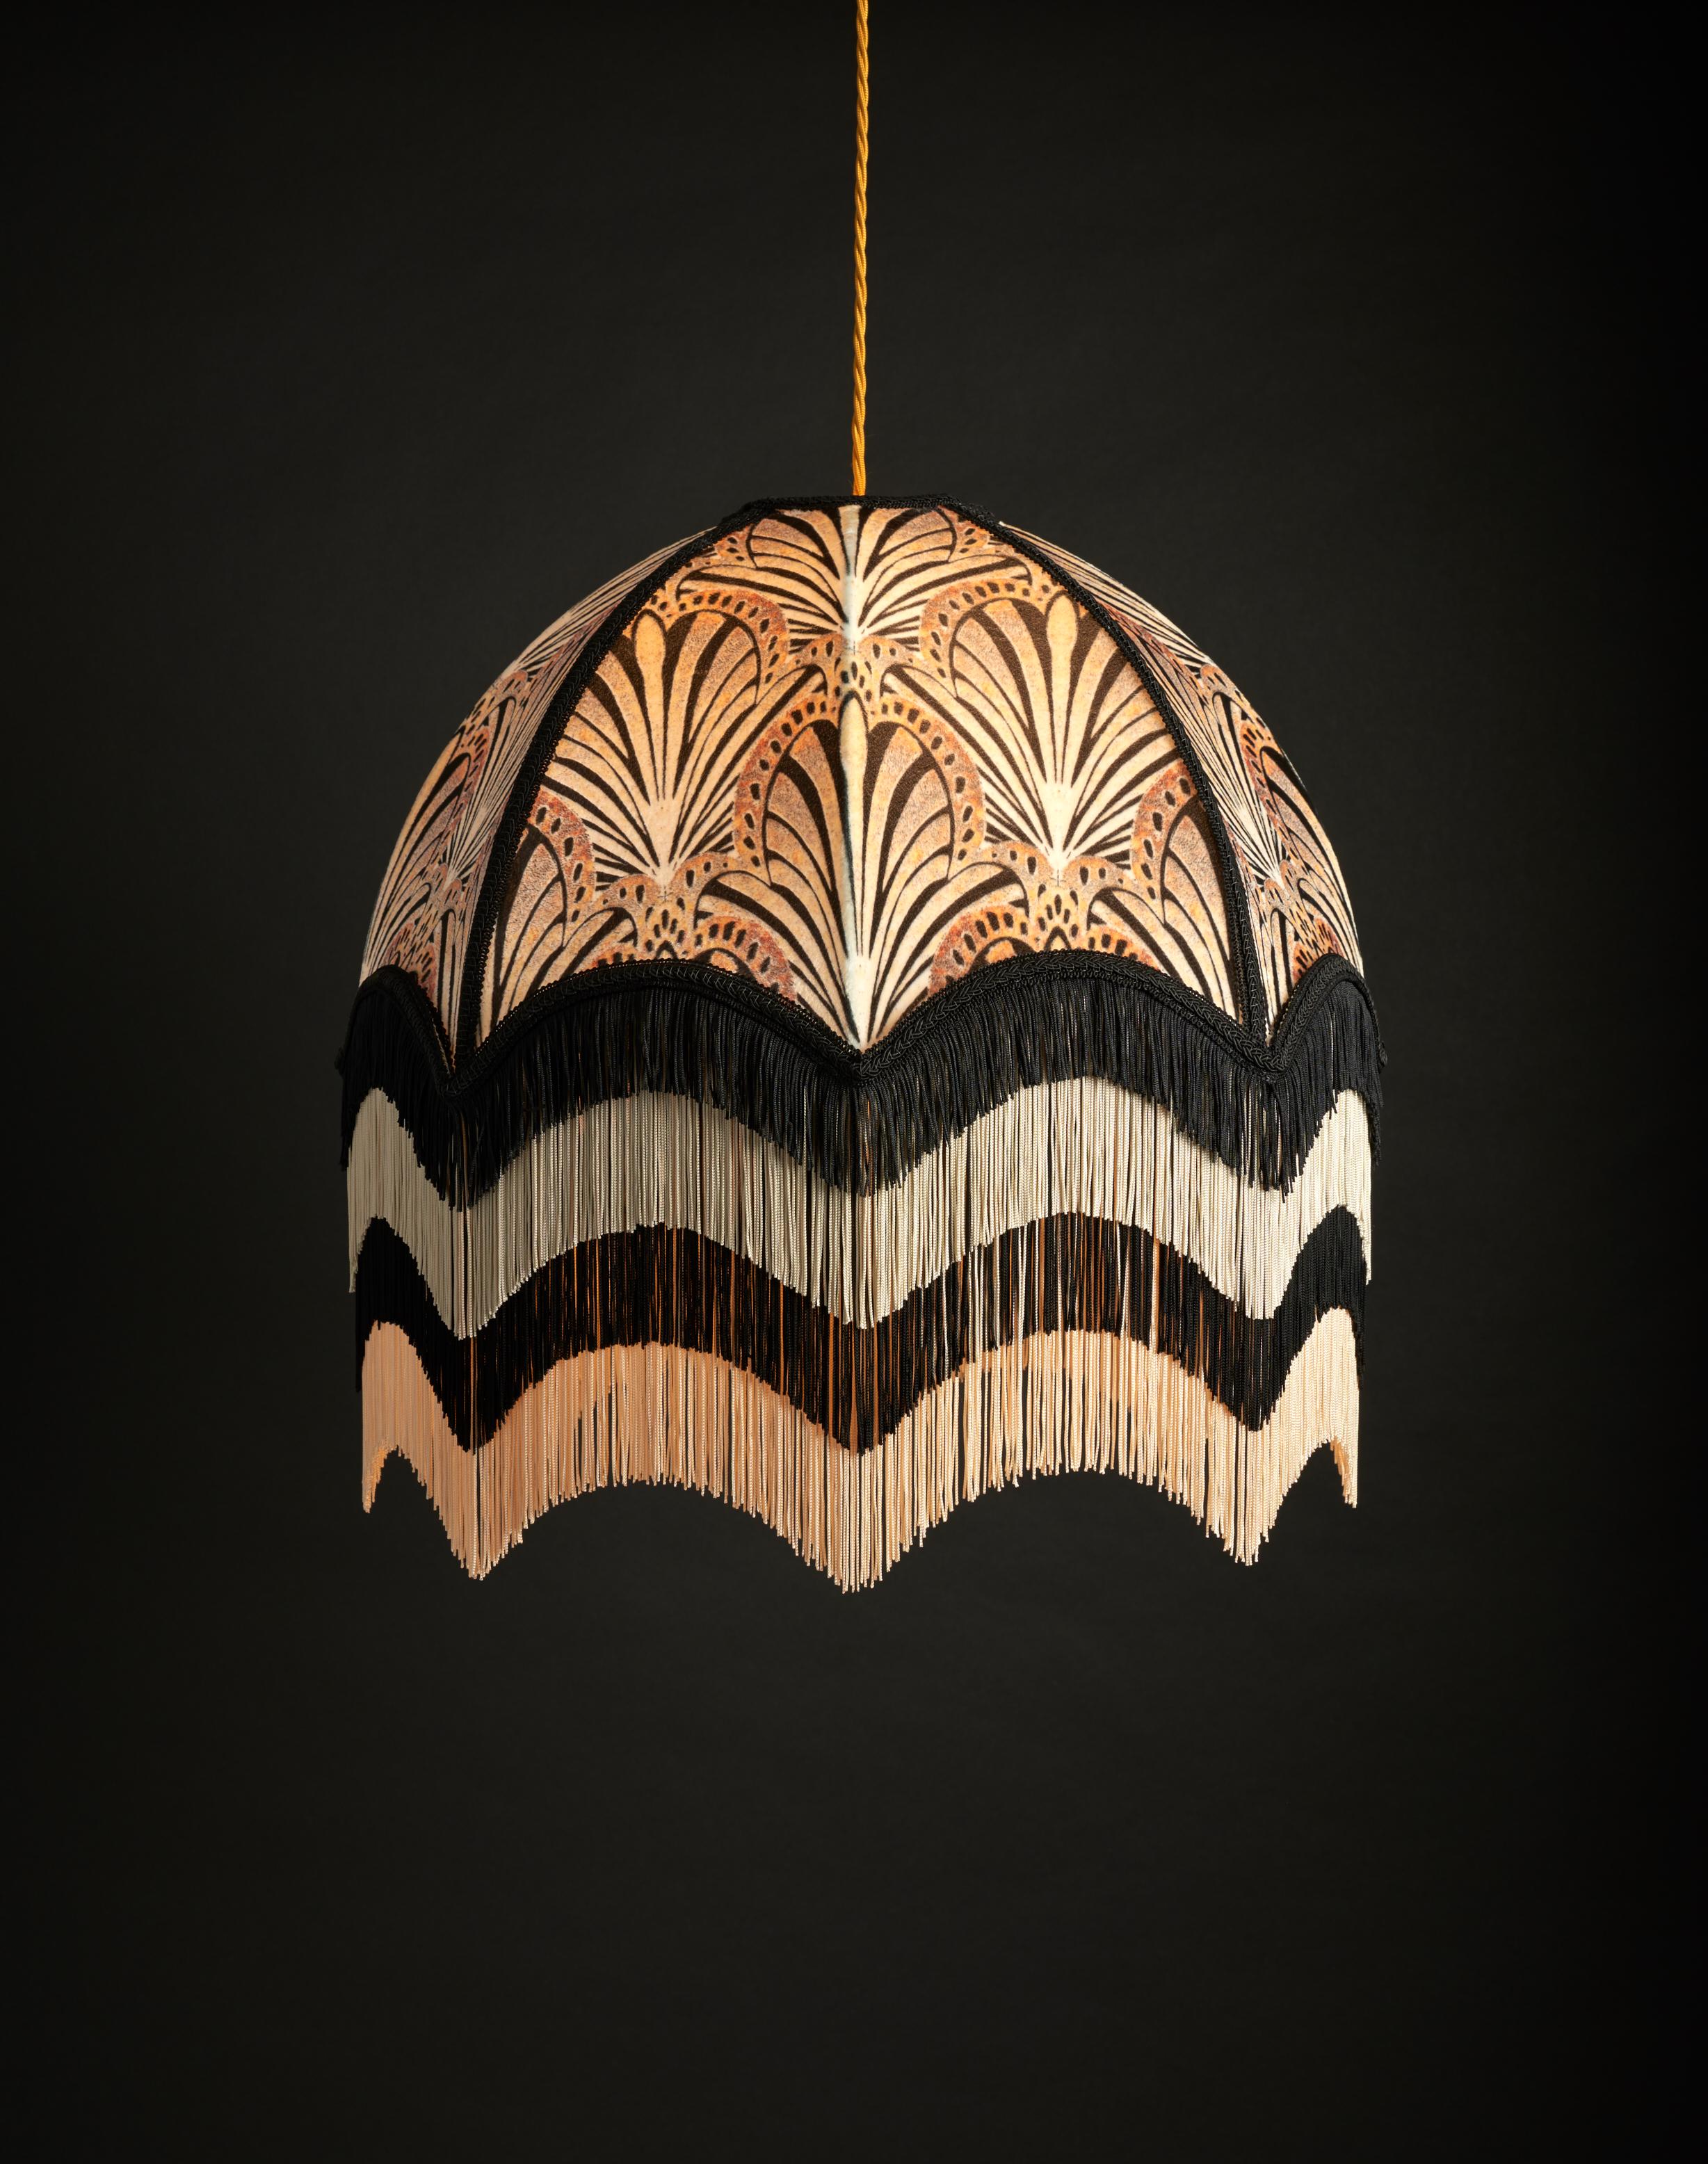 Jada is a beautiful fan-like design in soft gold and ivory tones mixed with black. With four layers of decadent fringe, you can tell these are inspired by the flappers of the 1920s.

Anna Hayman lampshades create a fantastic centrepiece to a room